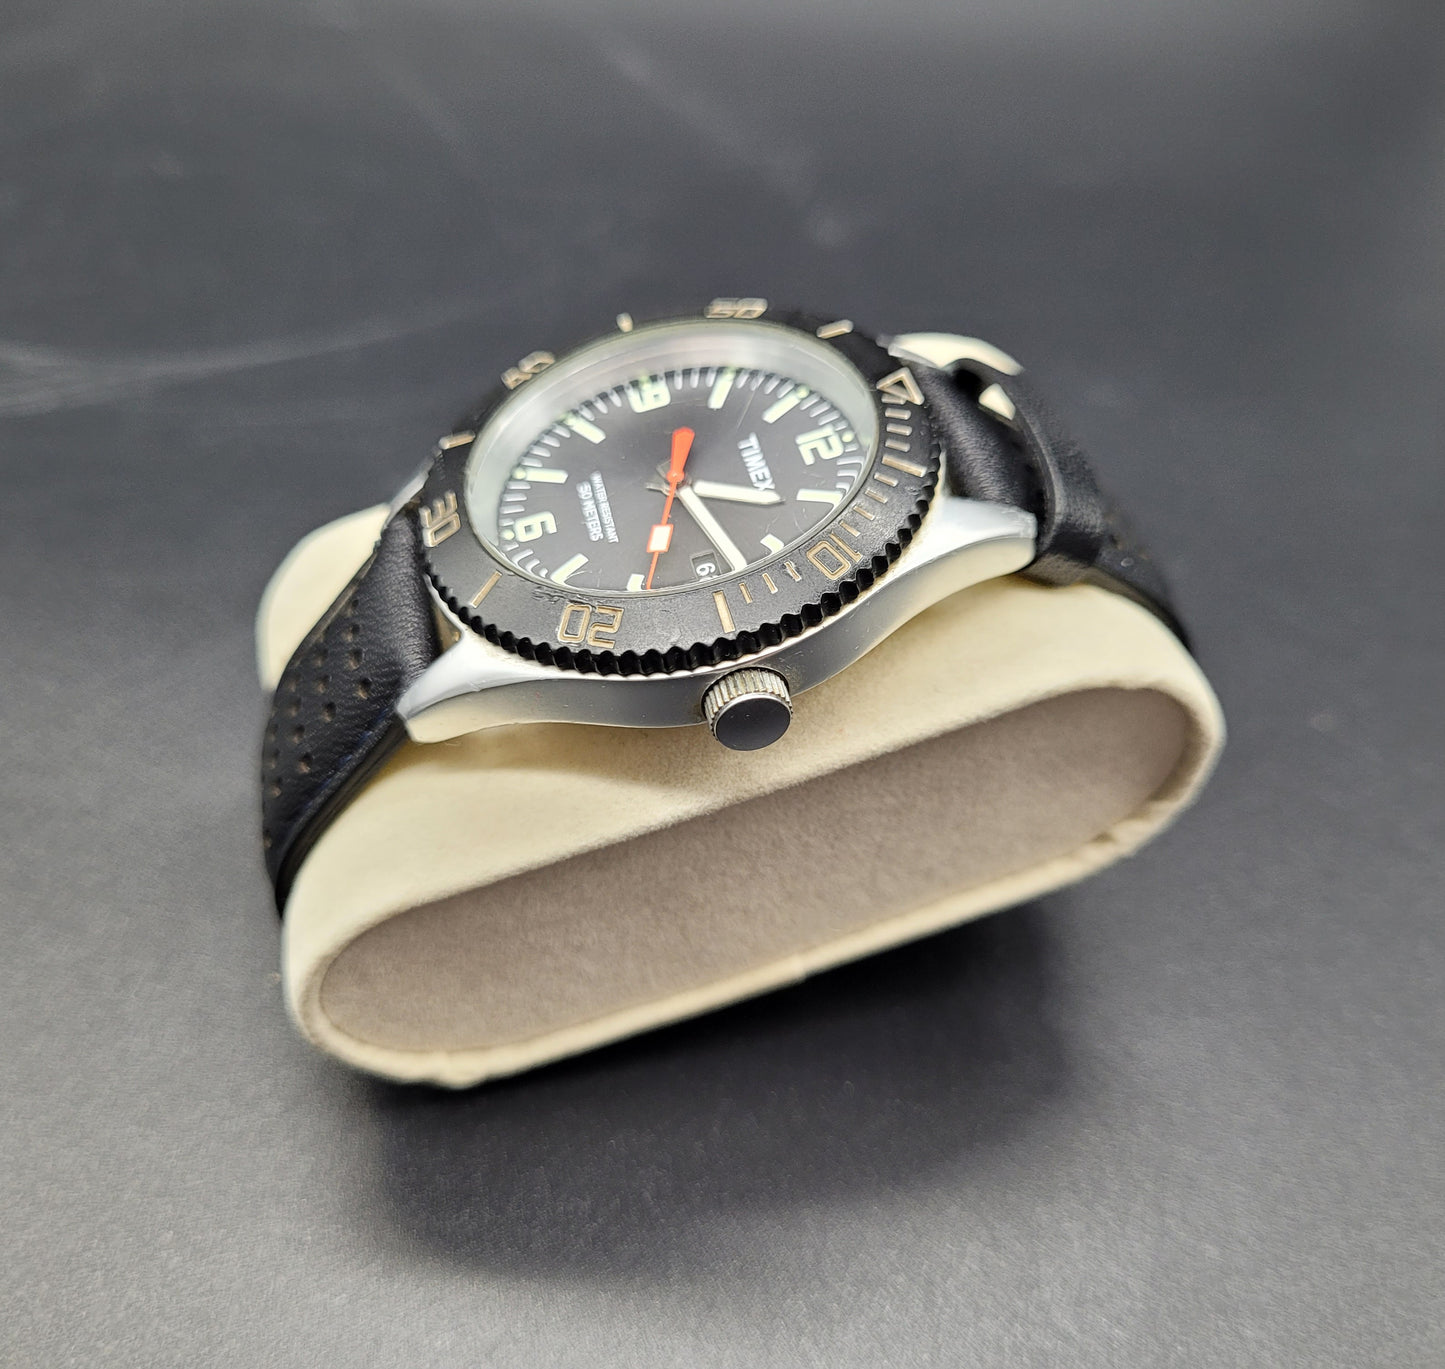 Vintage Mens Watch Diver style with Black Dial